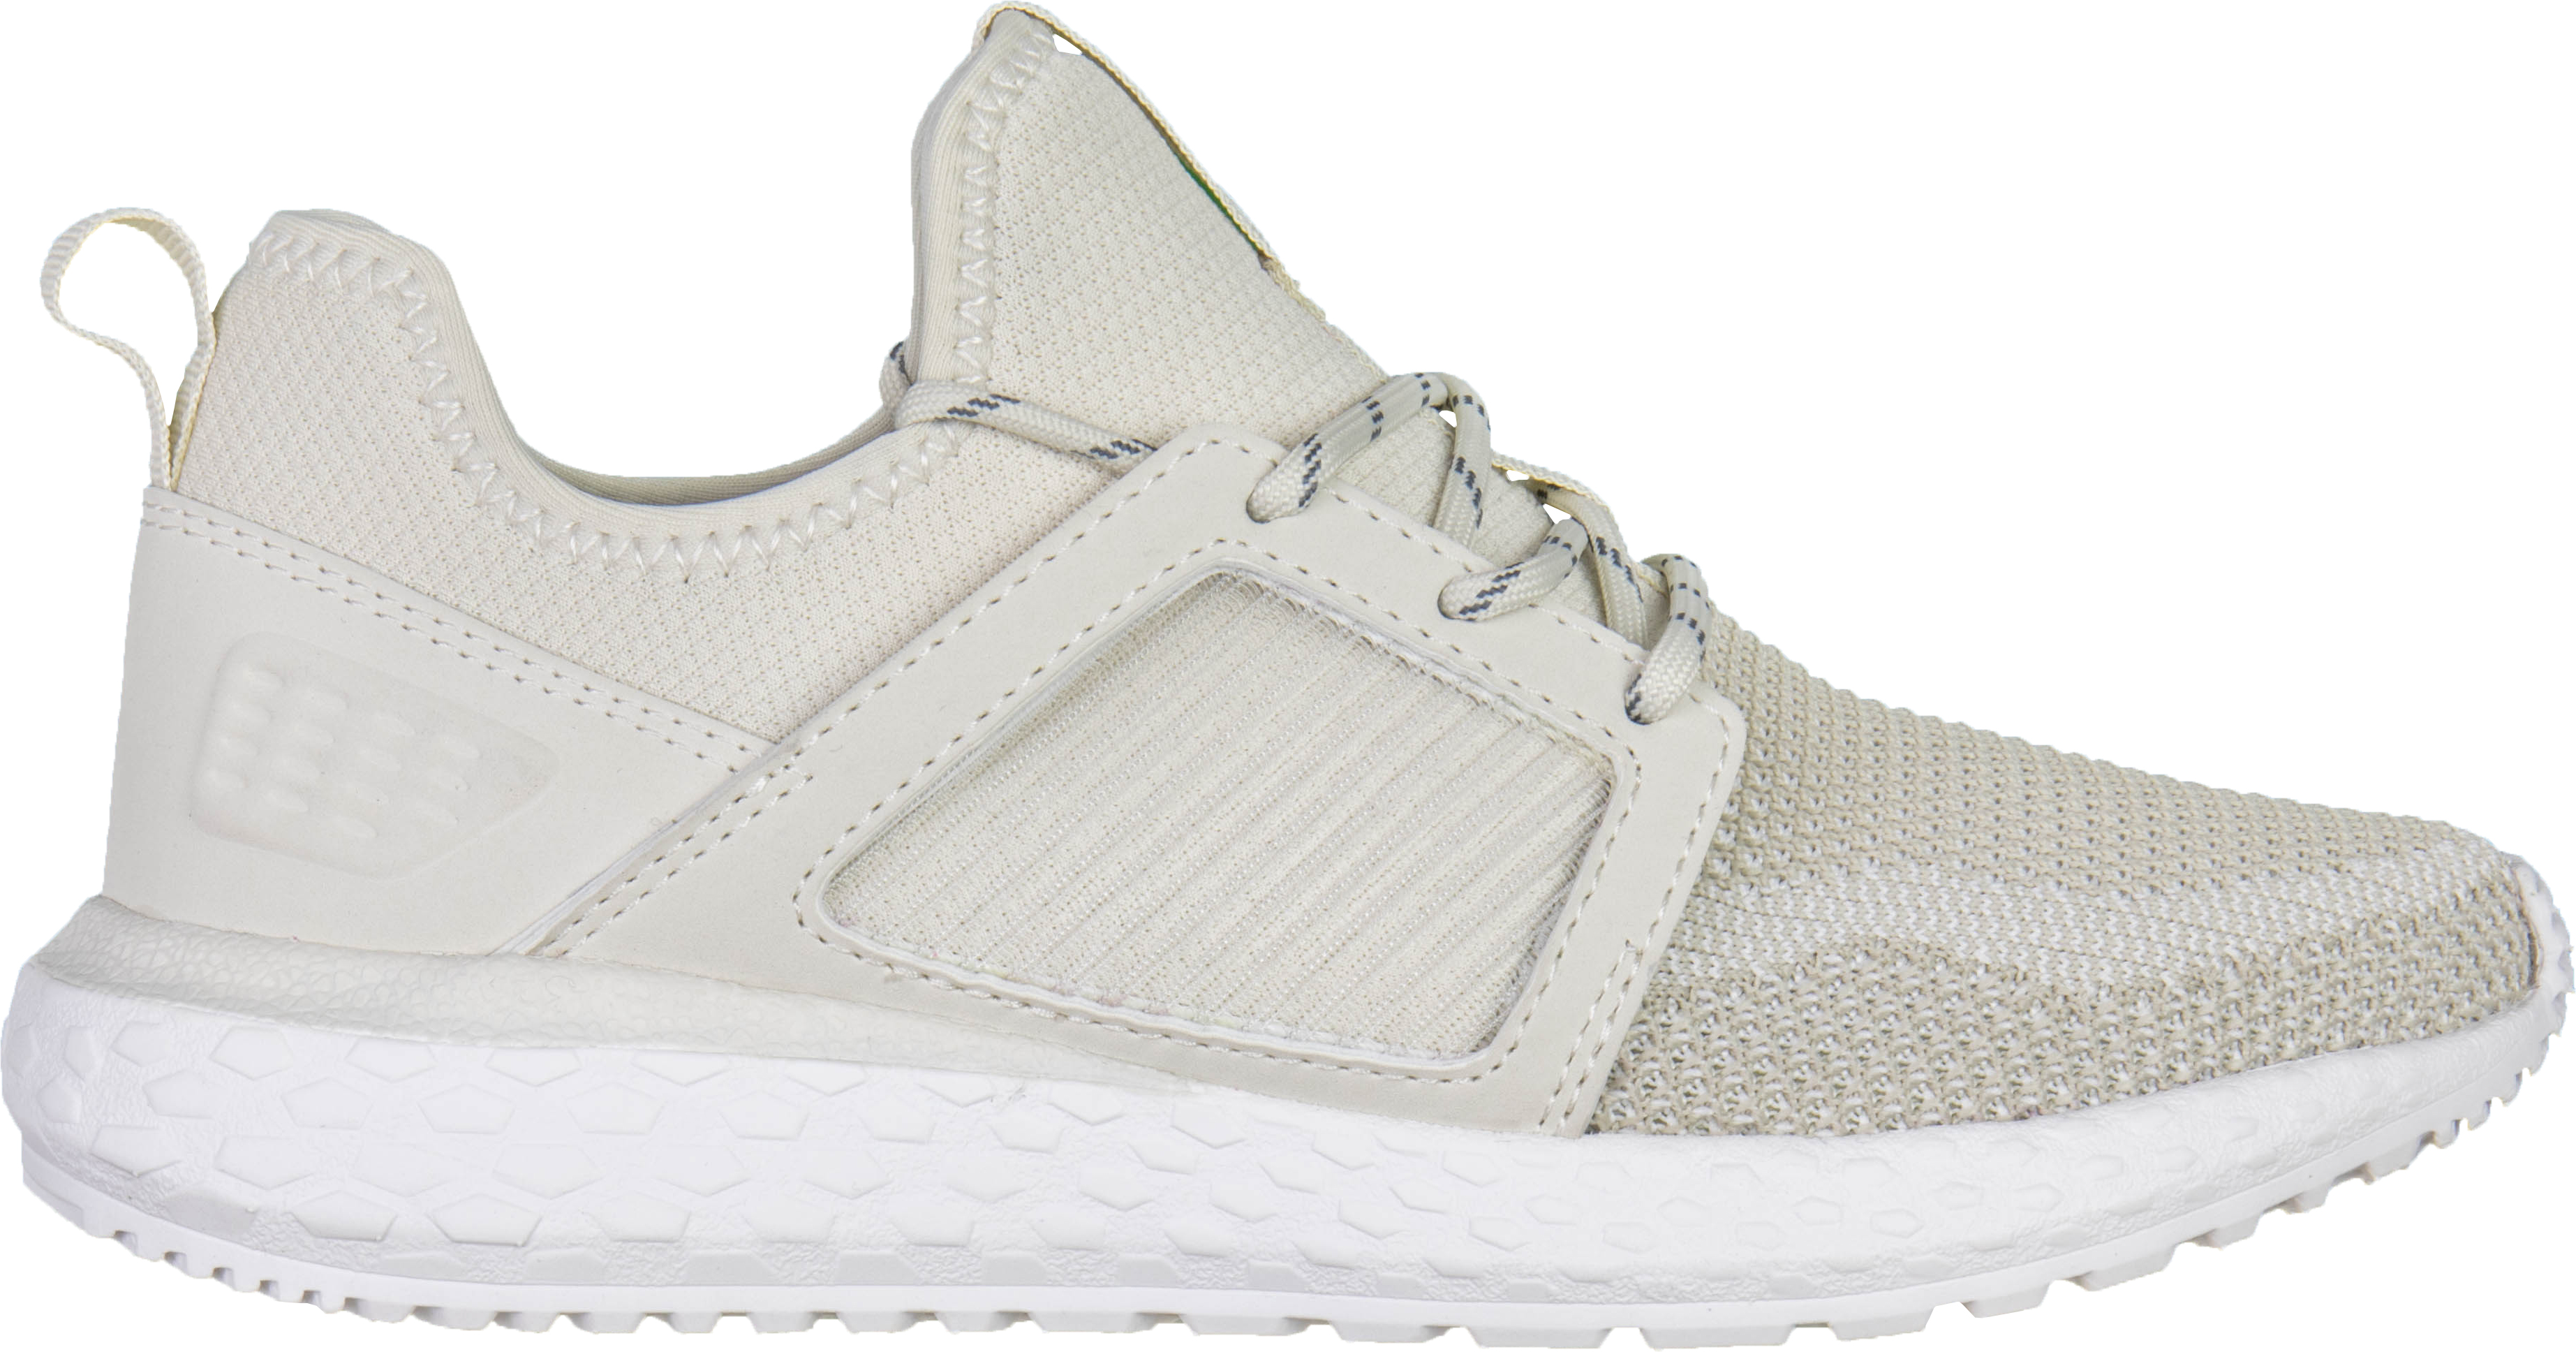 Women's Avia Caged Knit Sneaker - image 2 of 5